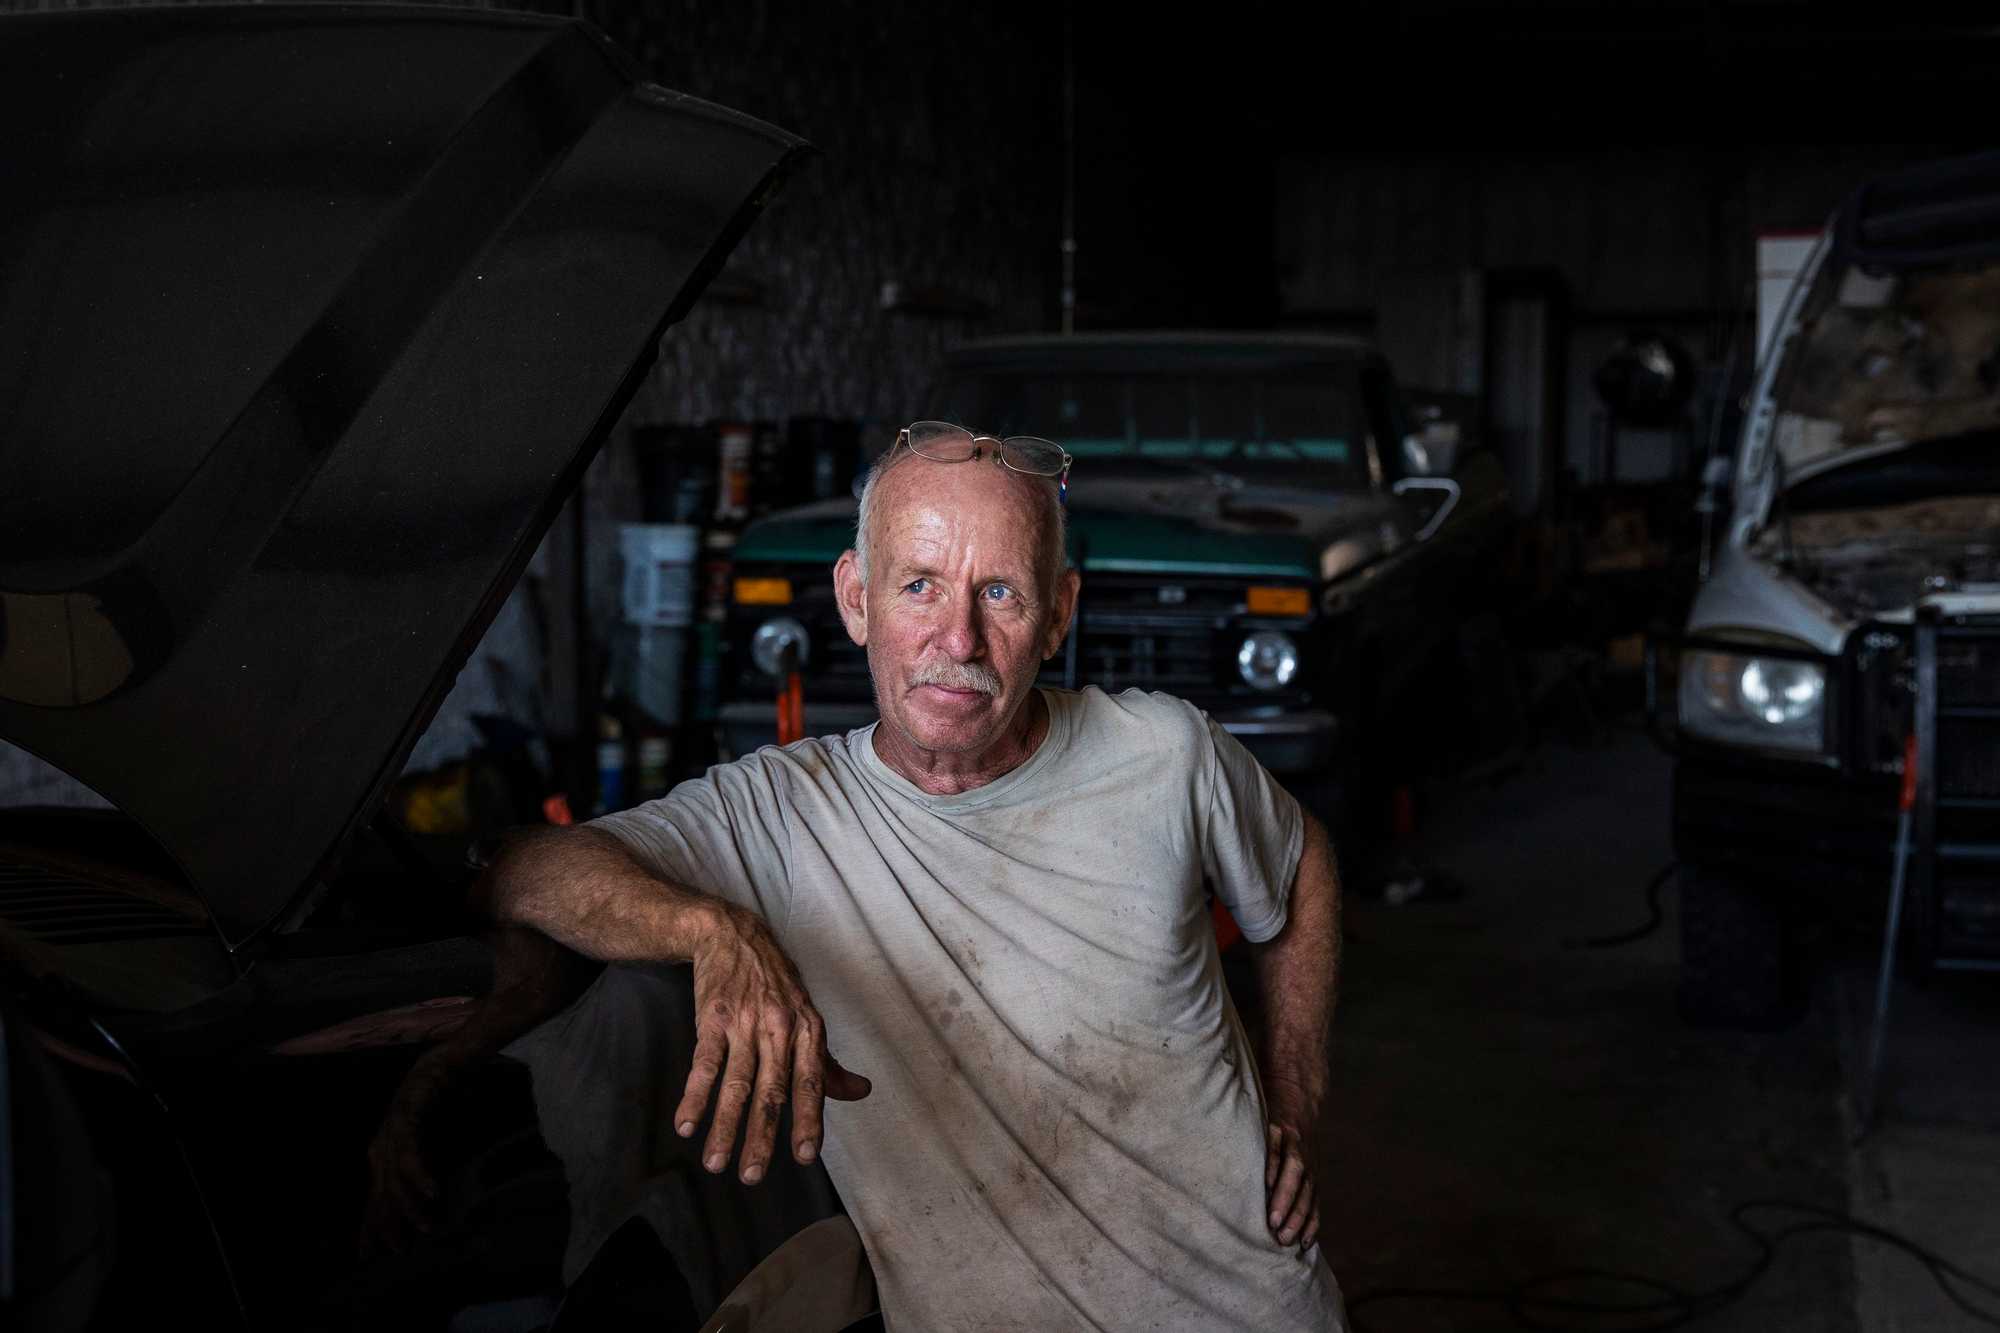 William Jackson works as a mechanic in a garage that also serves as a local gathering spot. 

